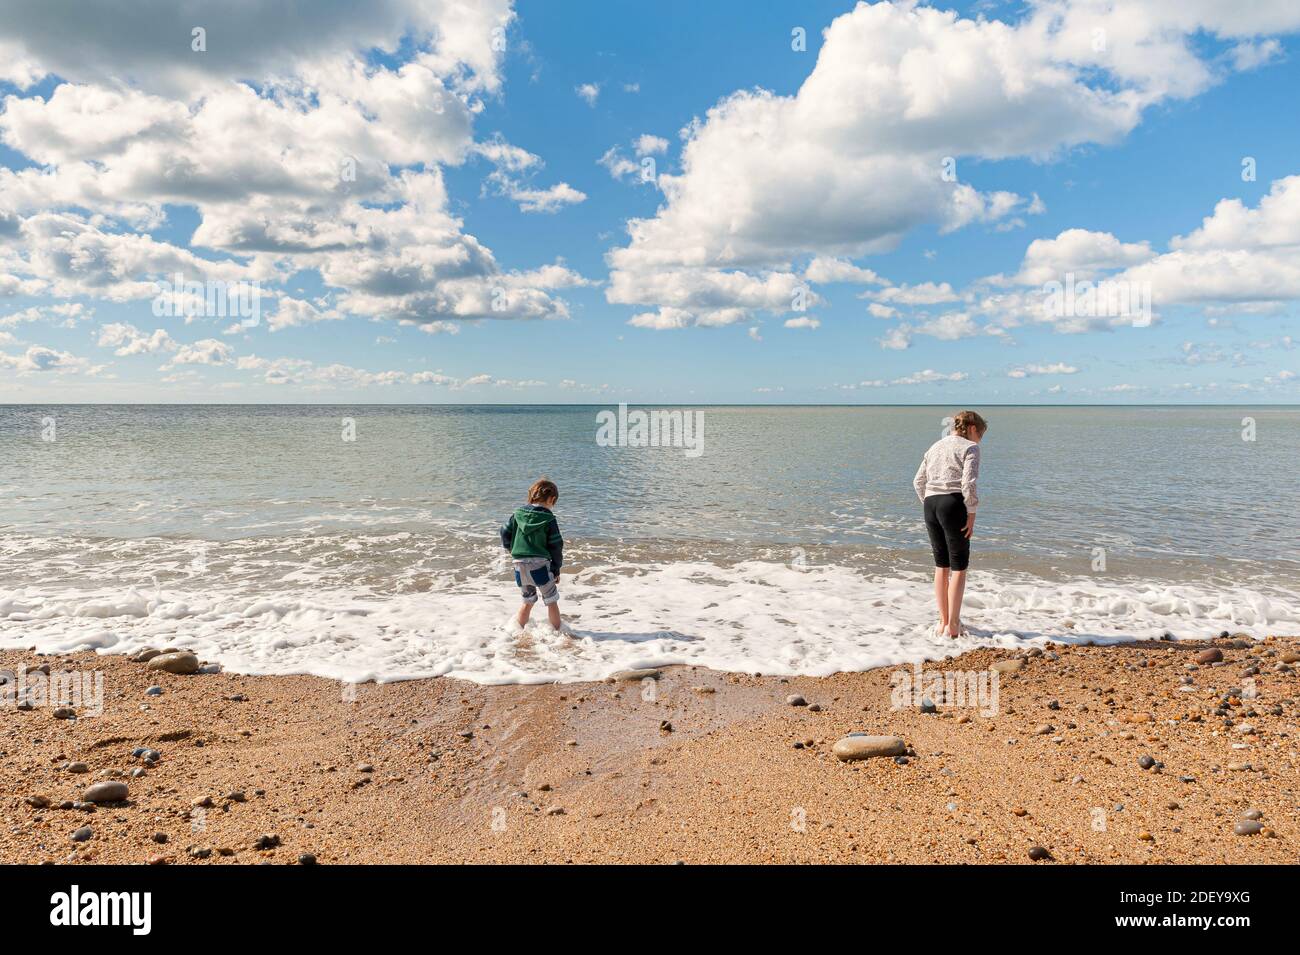 08-29-2020. Dorset, UK. Family day out at the beach during sunny but windy day. Children roaming wildly and enjoying their trip. Jurassic Cliffs Coast Stock Photo